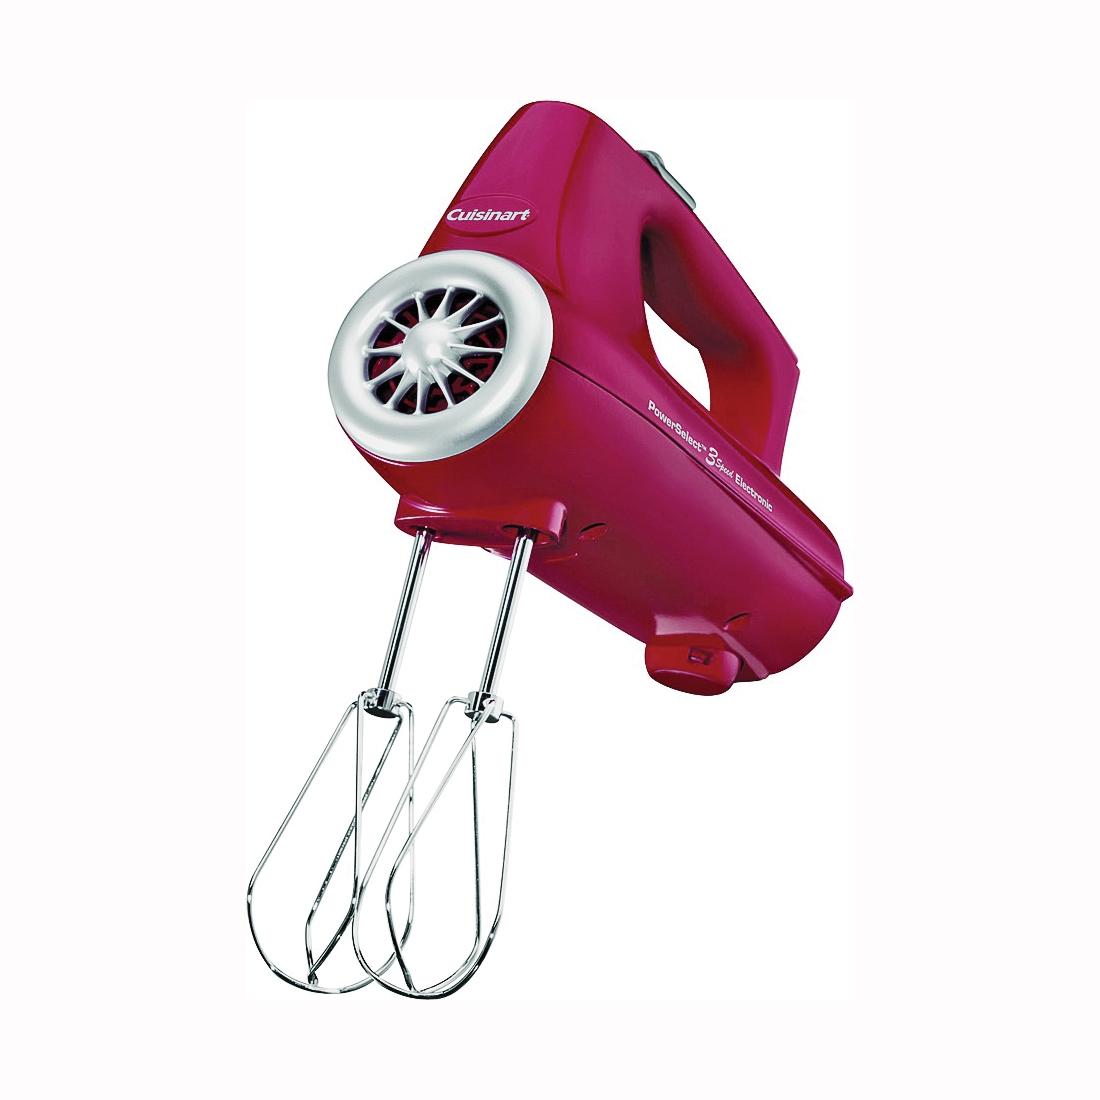 Cuisinart Power Select Series CHM-3R Hand Mixer, 120 V, 220 W, 3-Speed, Red - 1